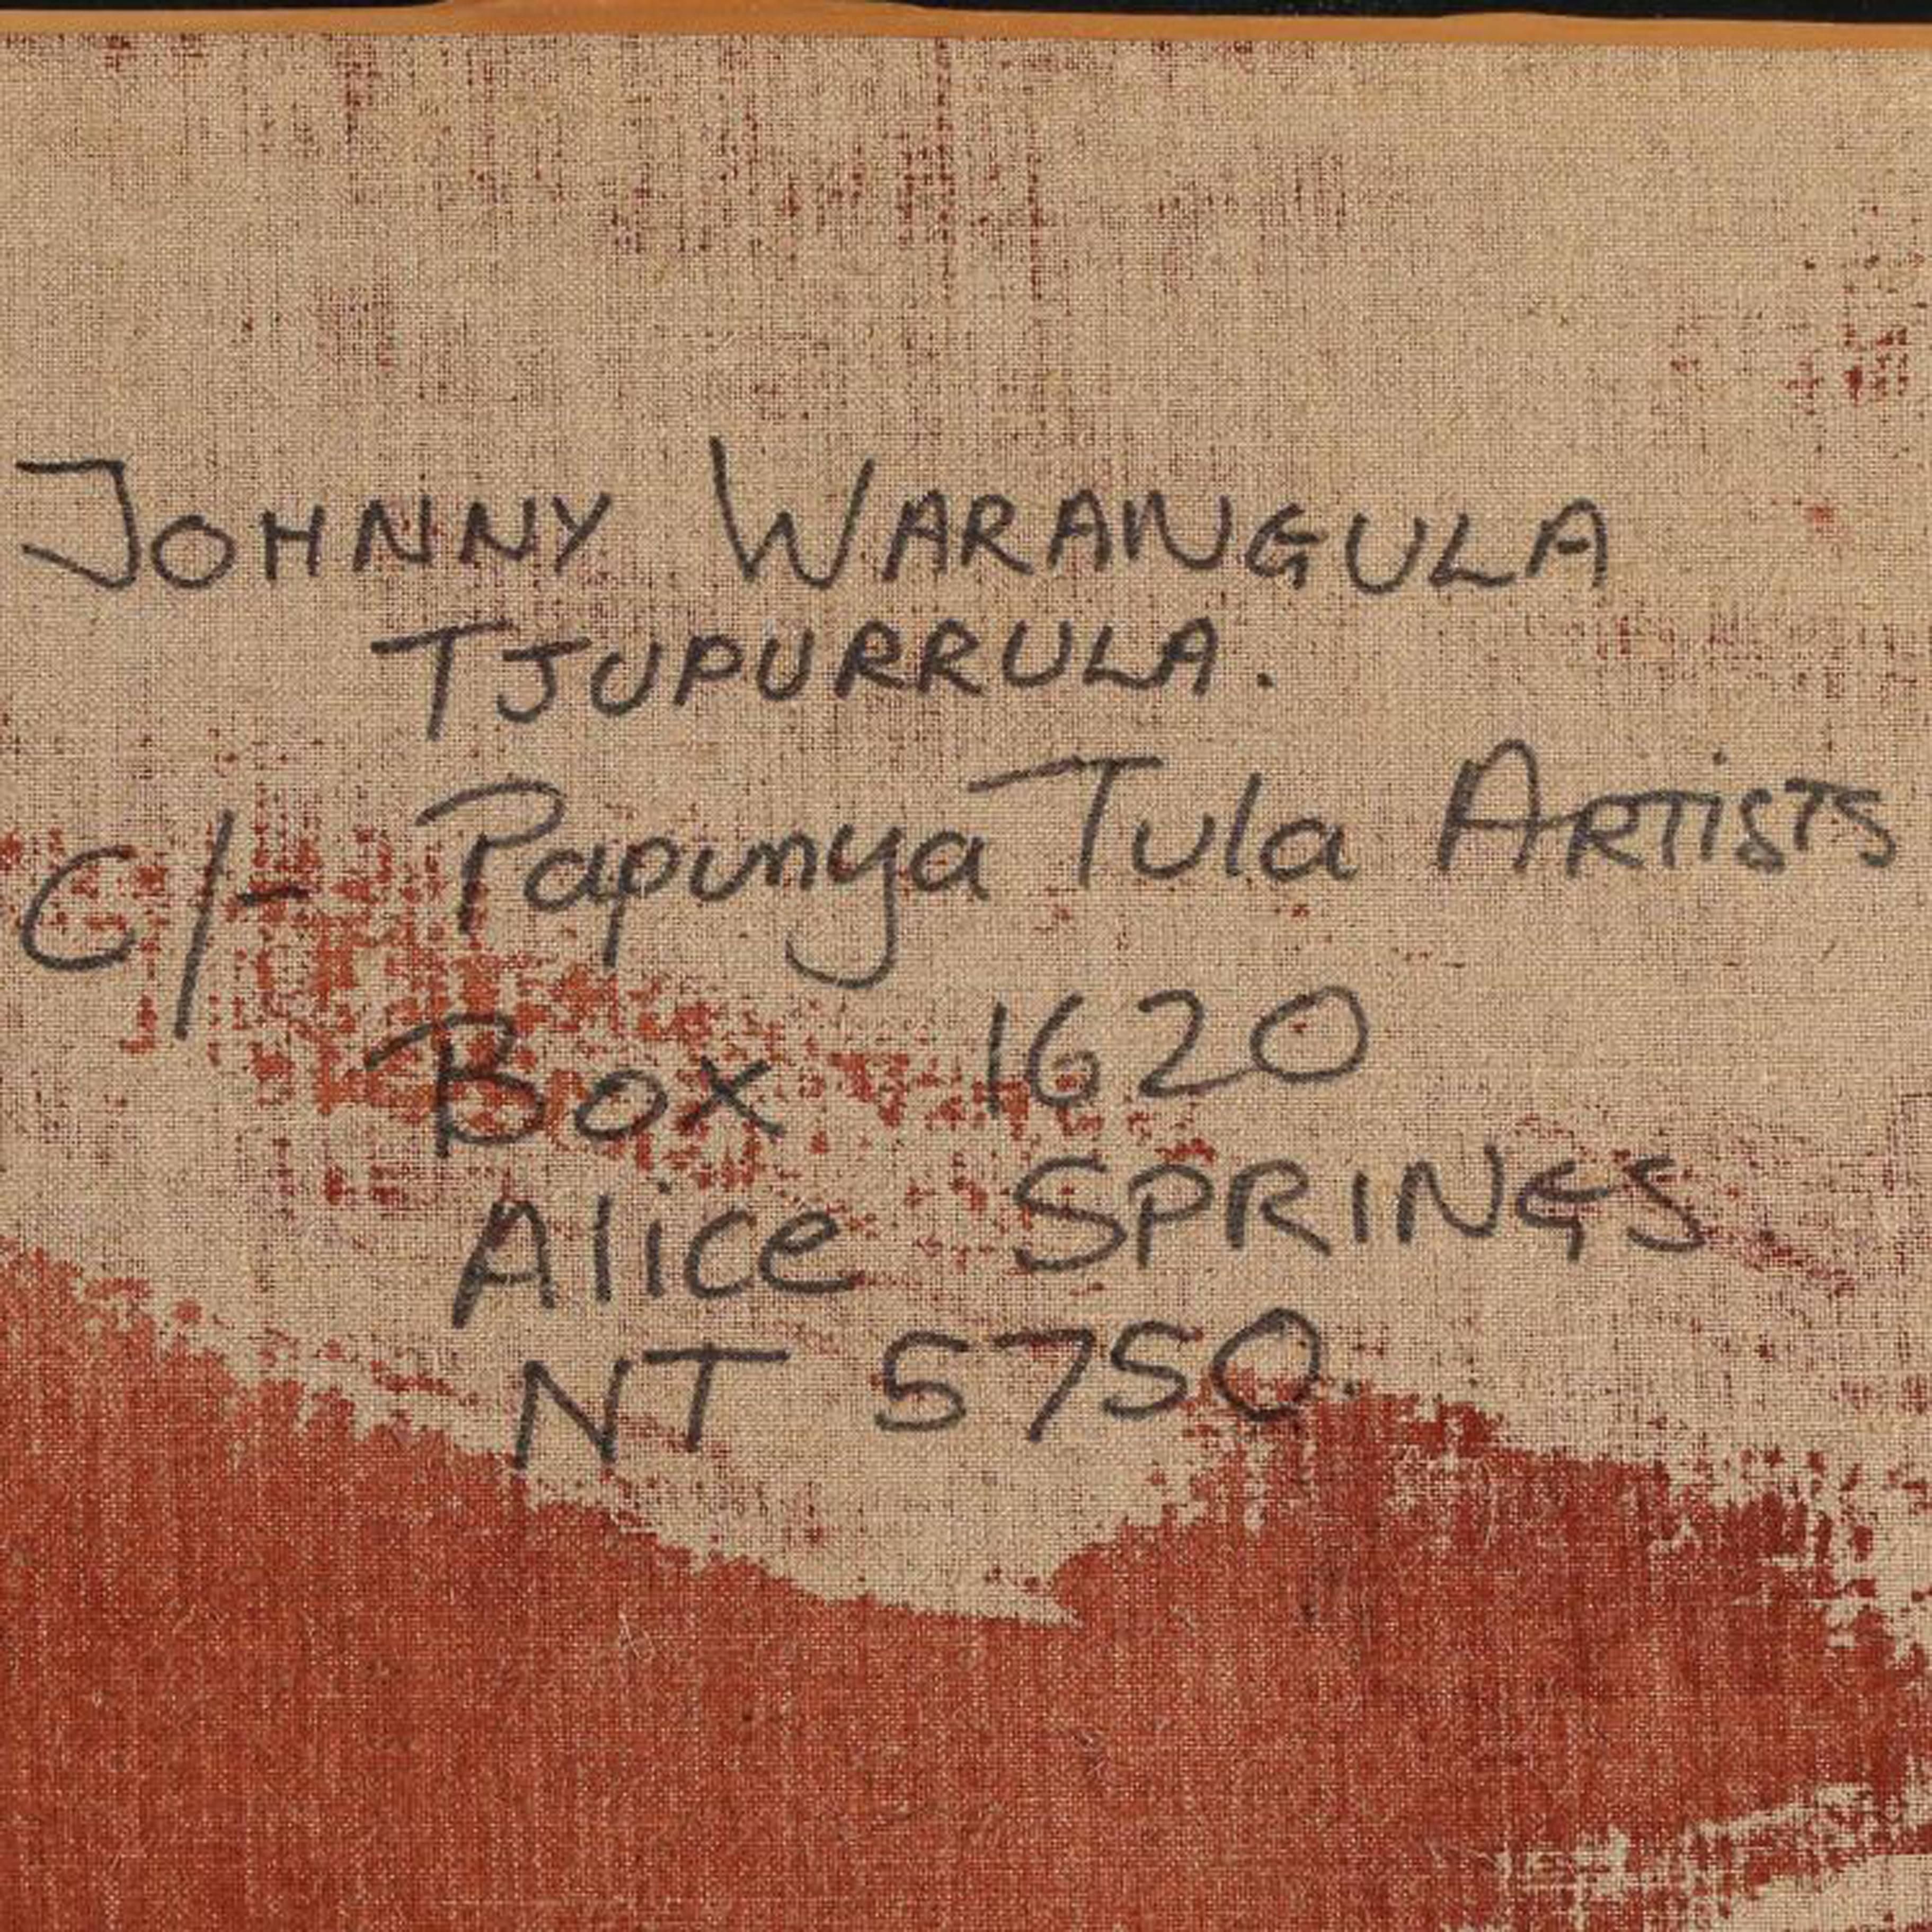 Australian Aboriginal painting,
Johnny Warangula Tjupurrula (1918-2001),
Kamparapa landscape,
1979.

One of the founders of Papunya Tula Artists and most renowned painters of the desert art movement, whose signature techniques of overdotting